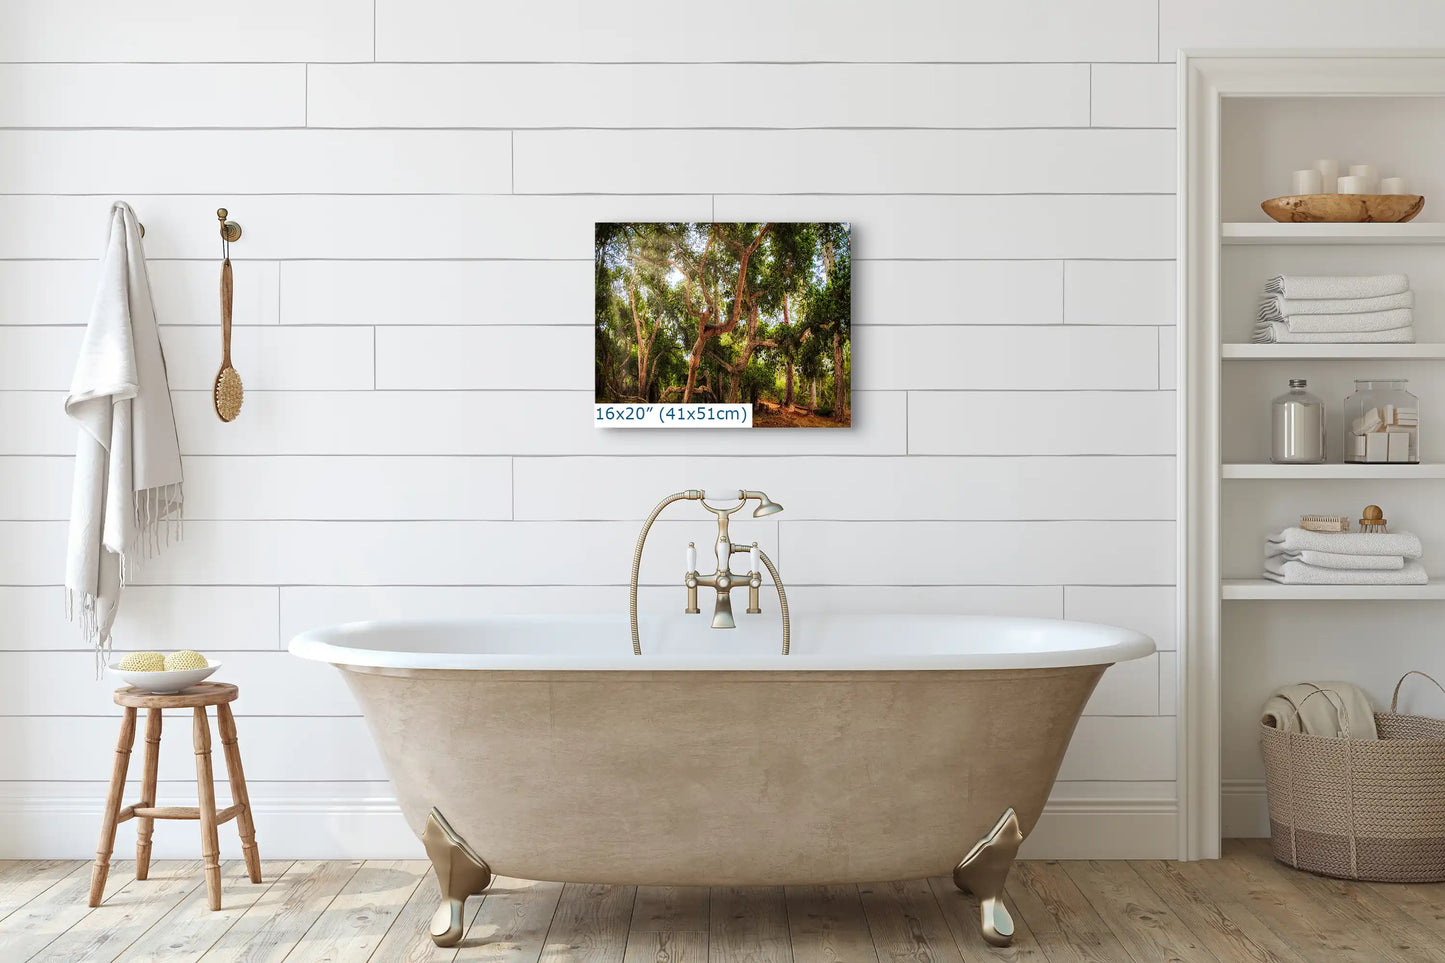 Elegant bathroom featuring a 16x20" wall art of the Coast Live Oak Tree above a classic freestanding bathtub, enhancing the tranquil ambiance.